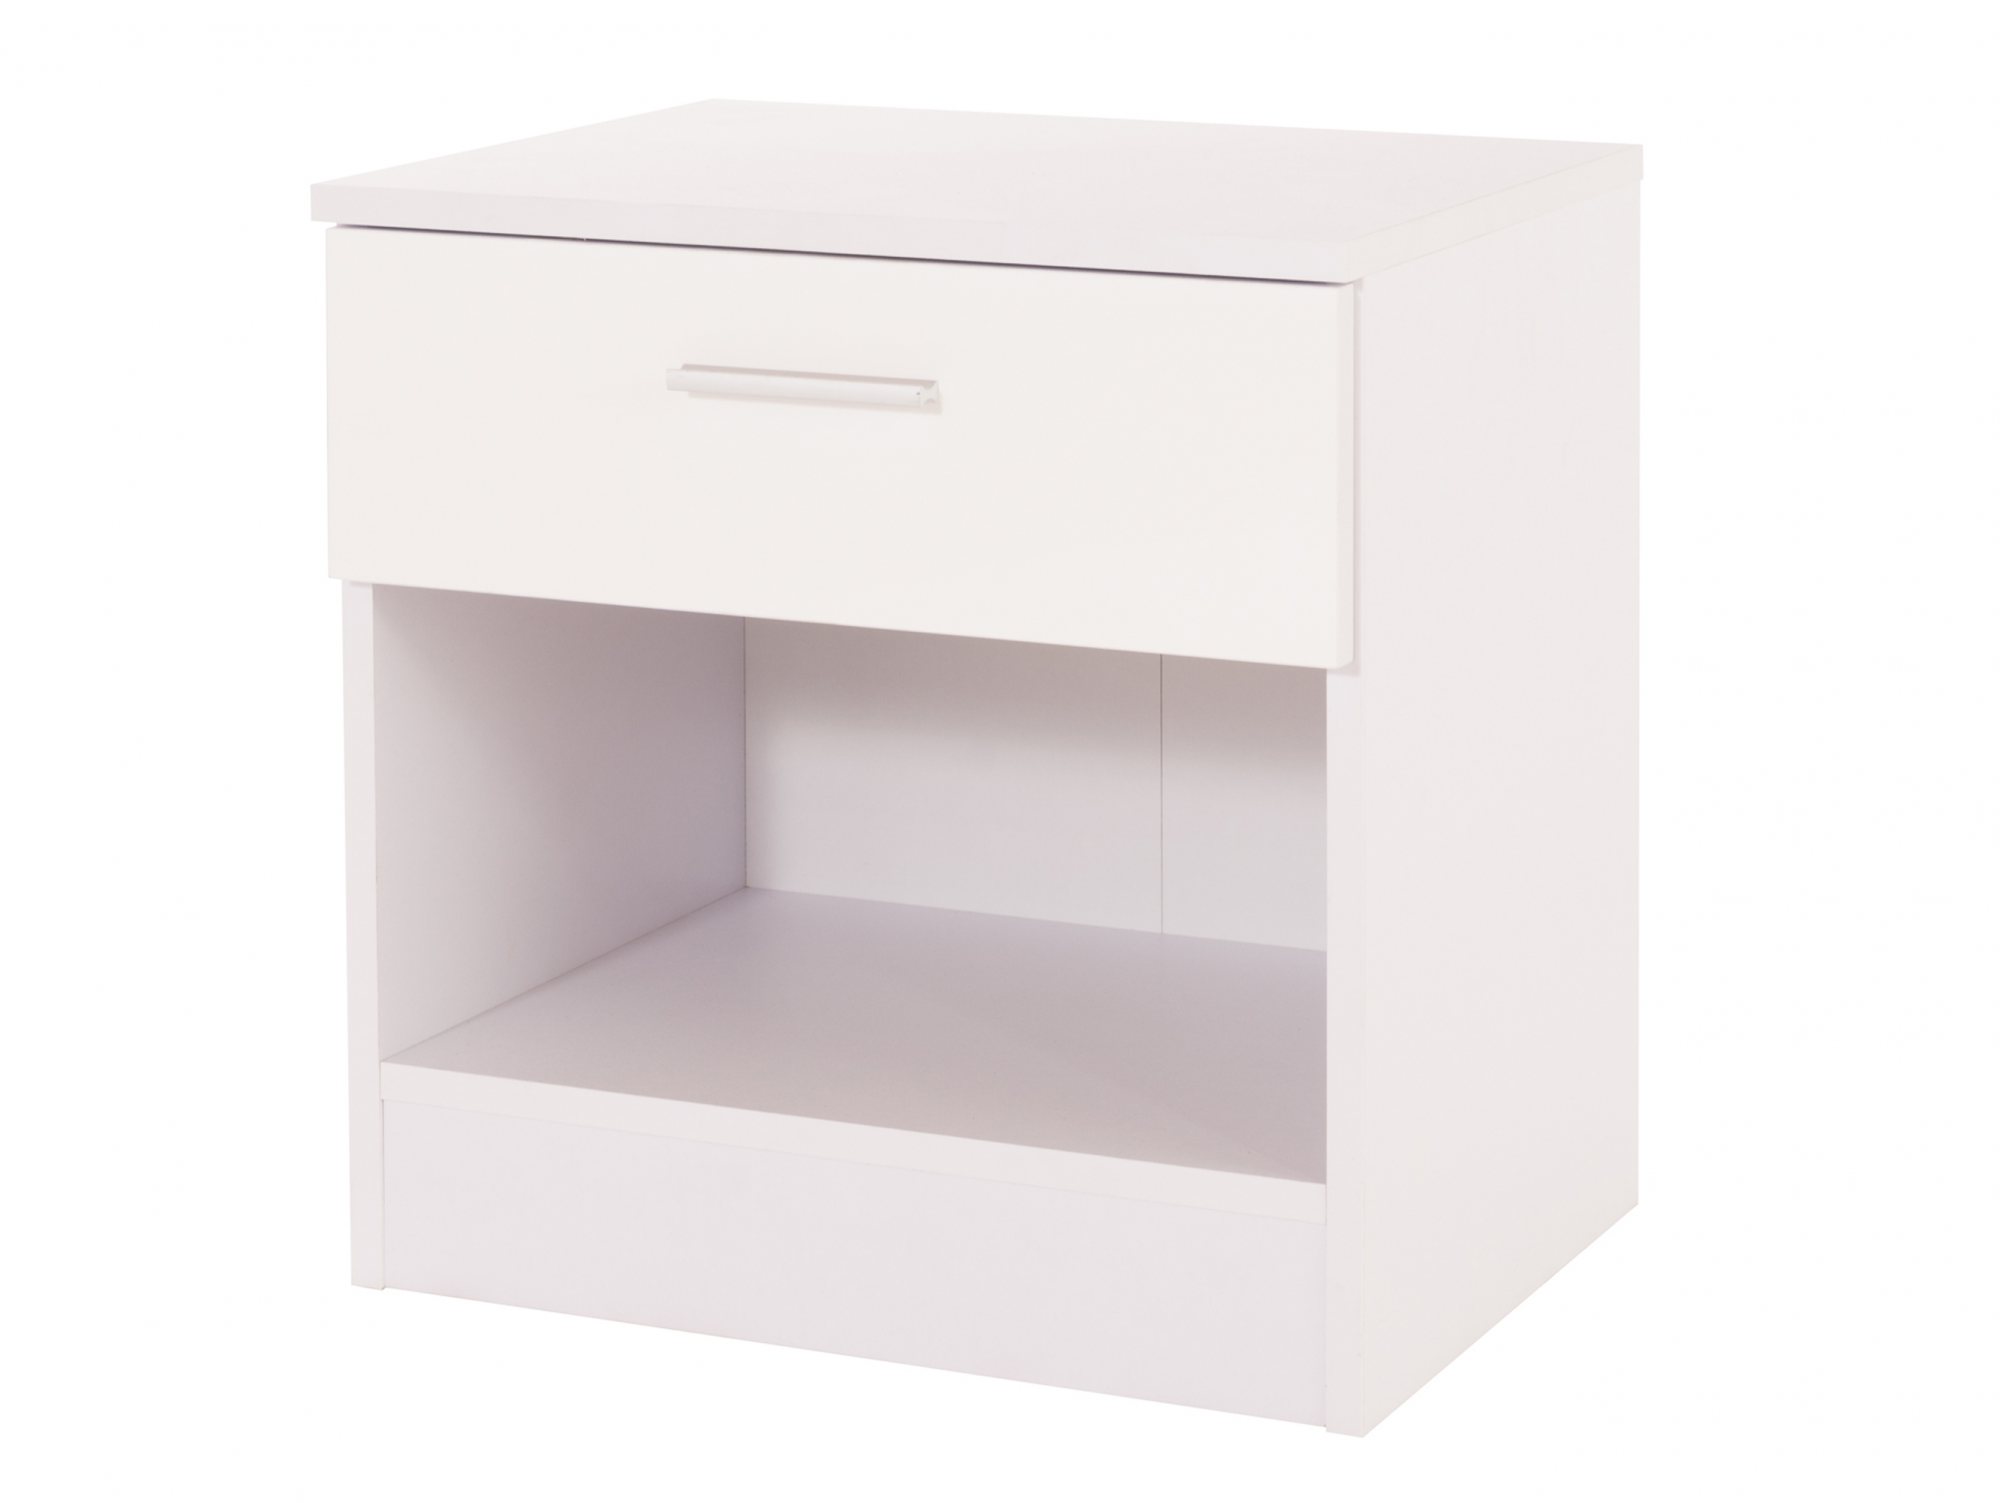 GFW GFW Ottawa White High Gloss 1 Drawer Bedside Cabinet (Flat Packed)